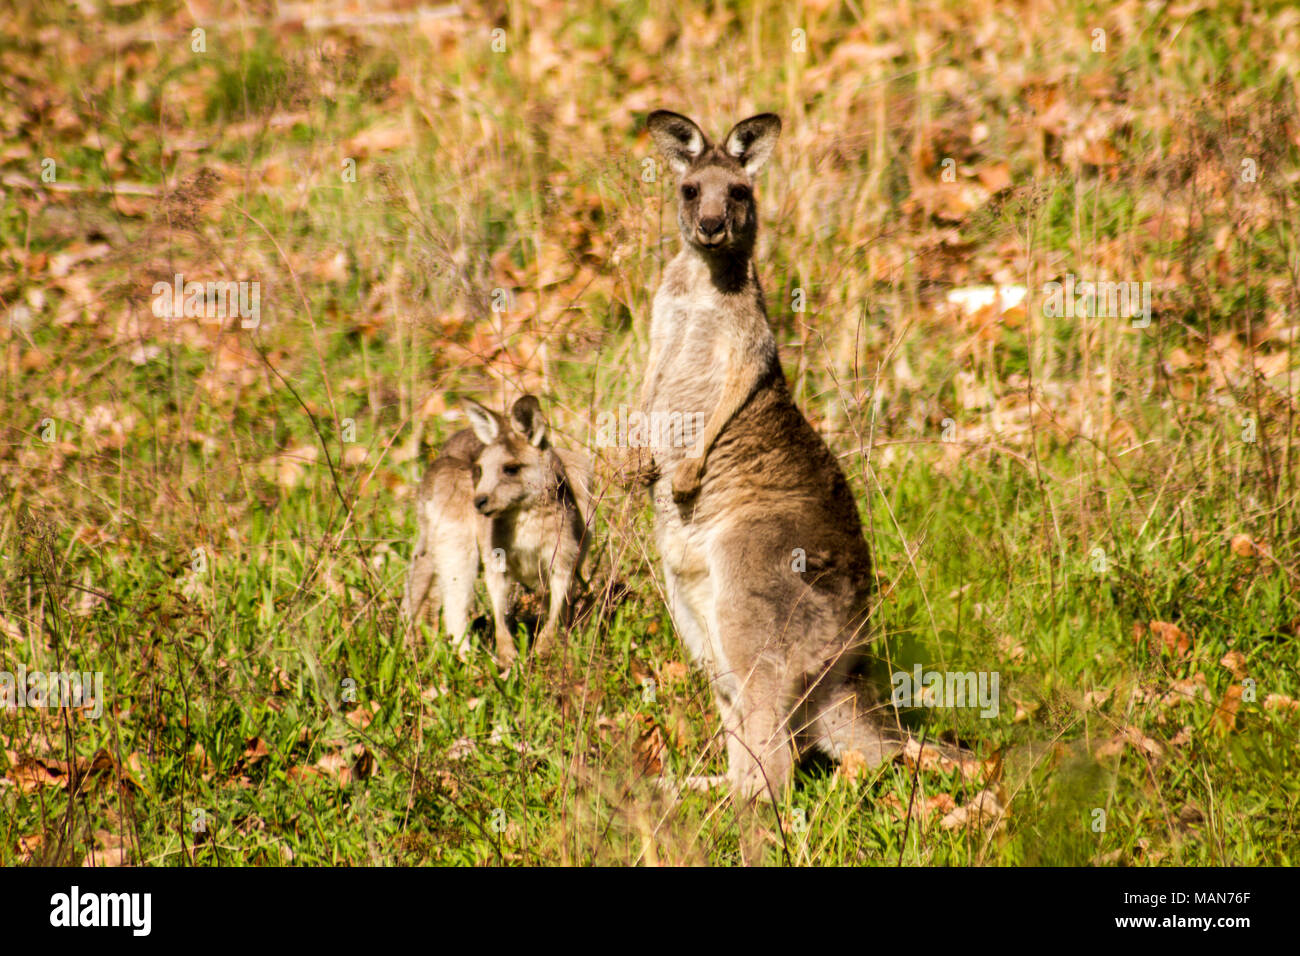 Mother Kangaroo stands tall while her joey feeds on the grass, the unusual attraction at Talbingo Tourist Park Stock Photo